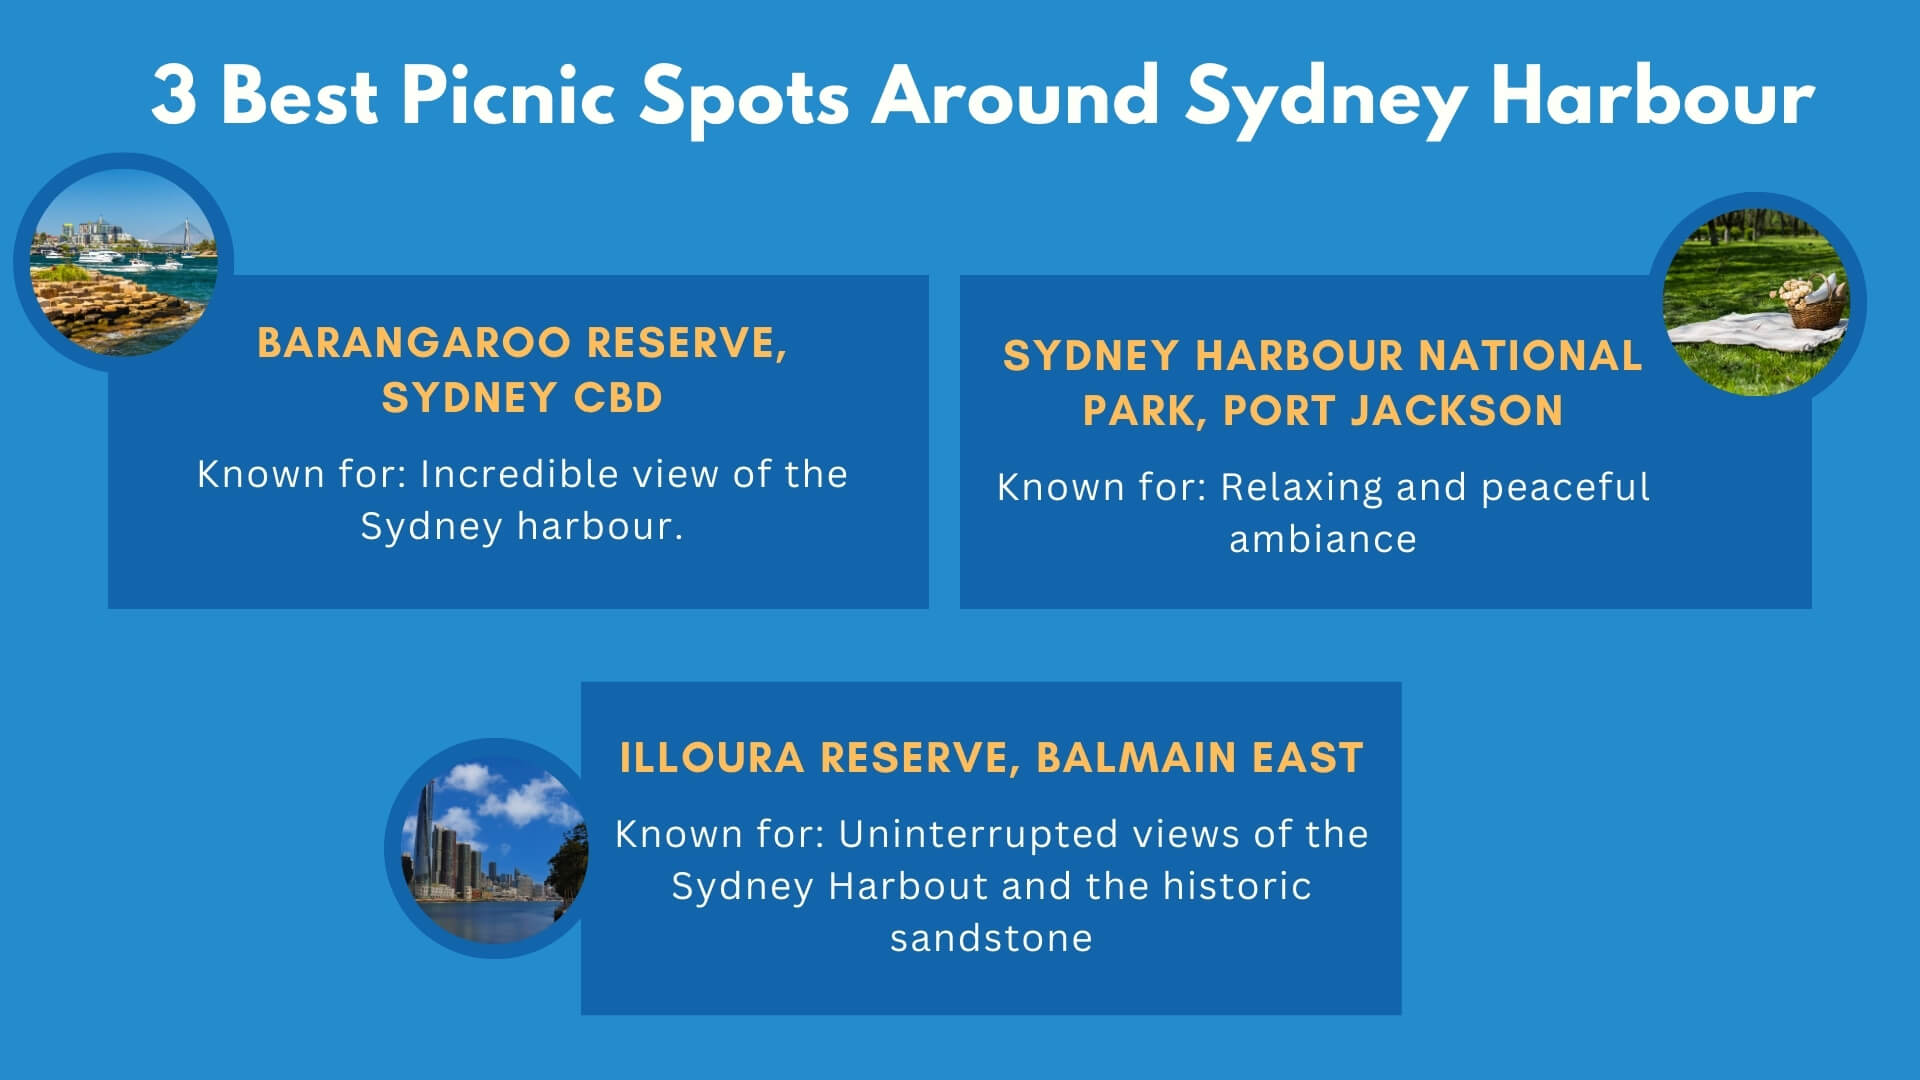 Best Picnic Spots Around Sydney Harbour infographic from Sydney Harbour Escapes